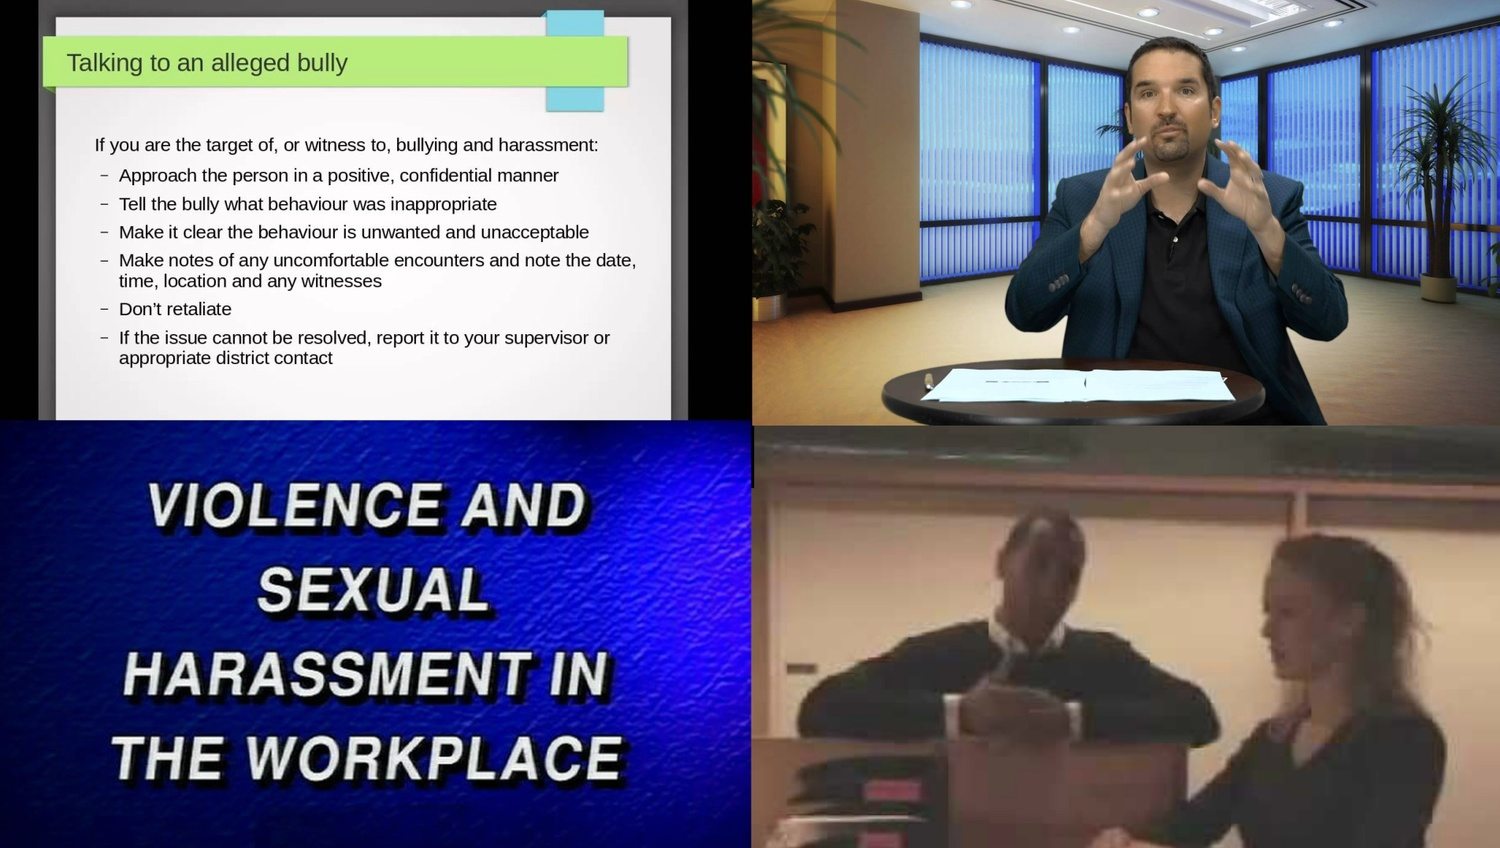 examples of old formats like live videos and presentation decks that were used to teach topics like violence and sexual harassment to the workforce.